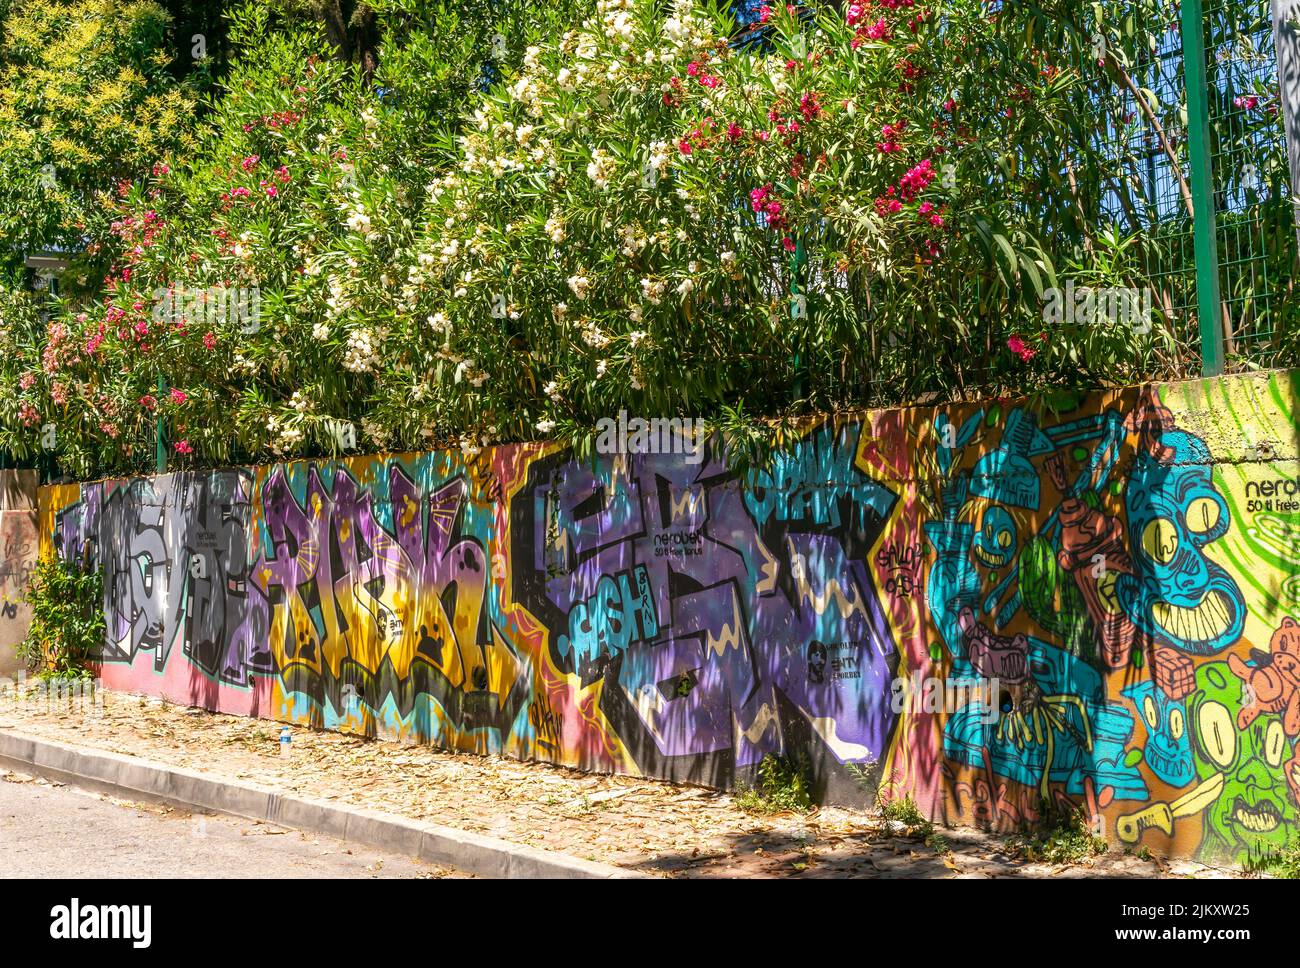 Fence covered with colorful murals under the blooming trees at Hülya Sk., Moda, Kadikoy, istanbul, Turkey, Asian side Stock Photo